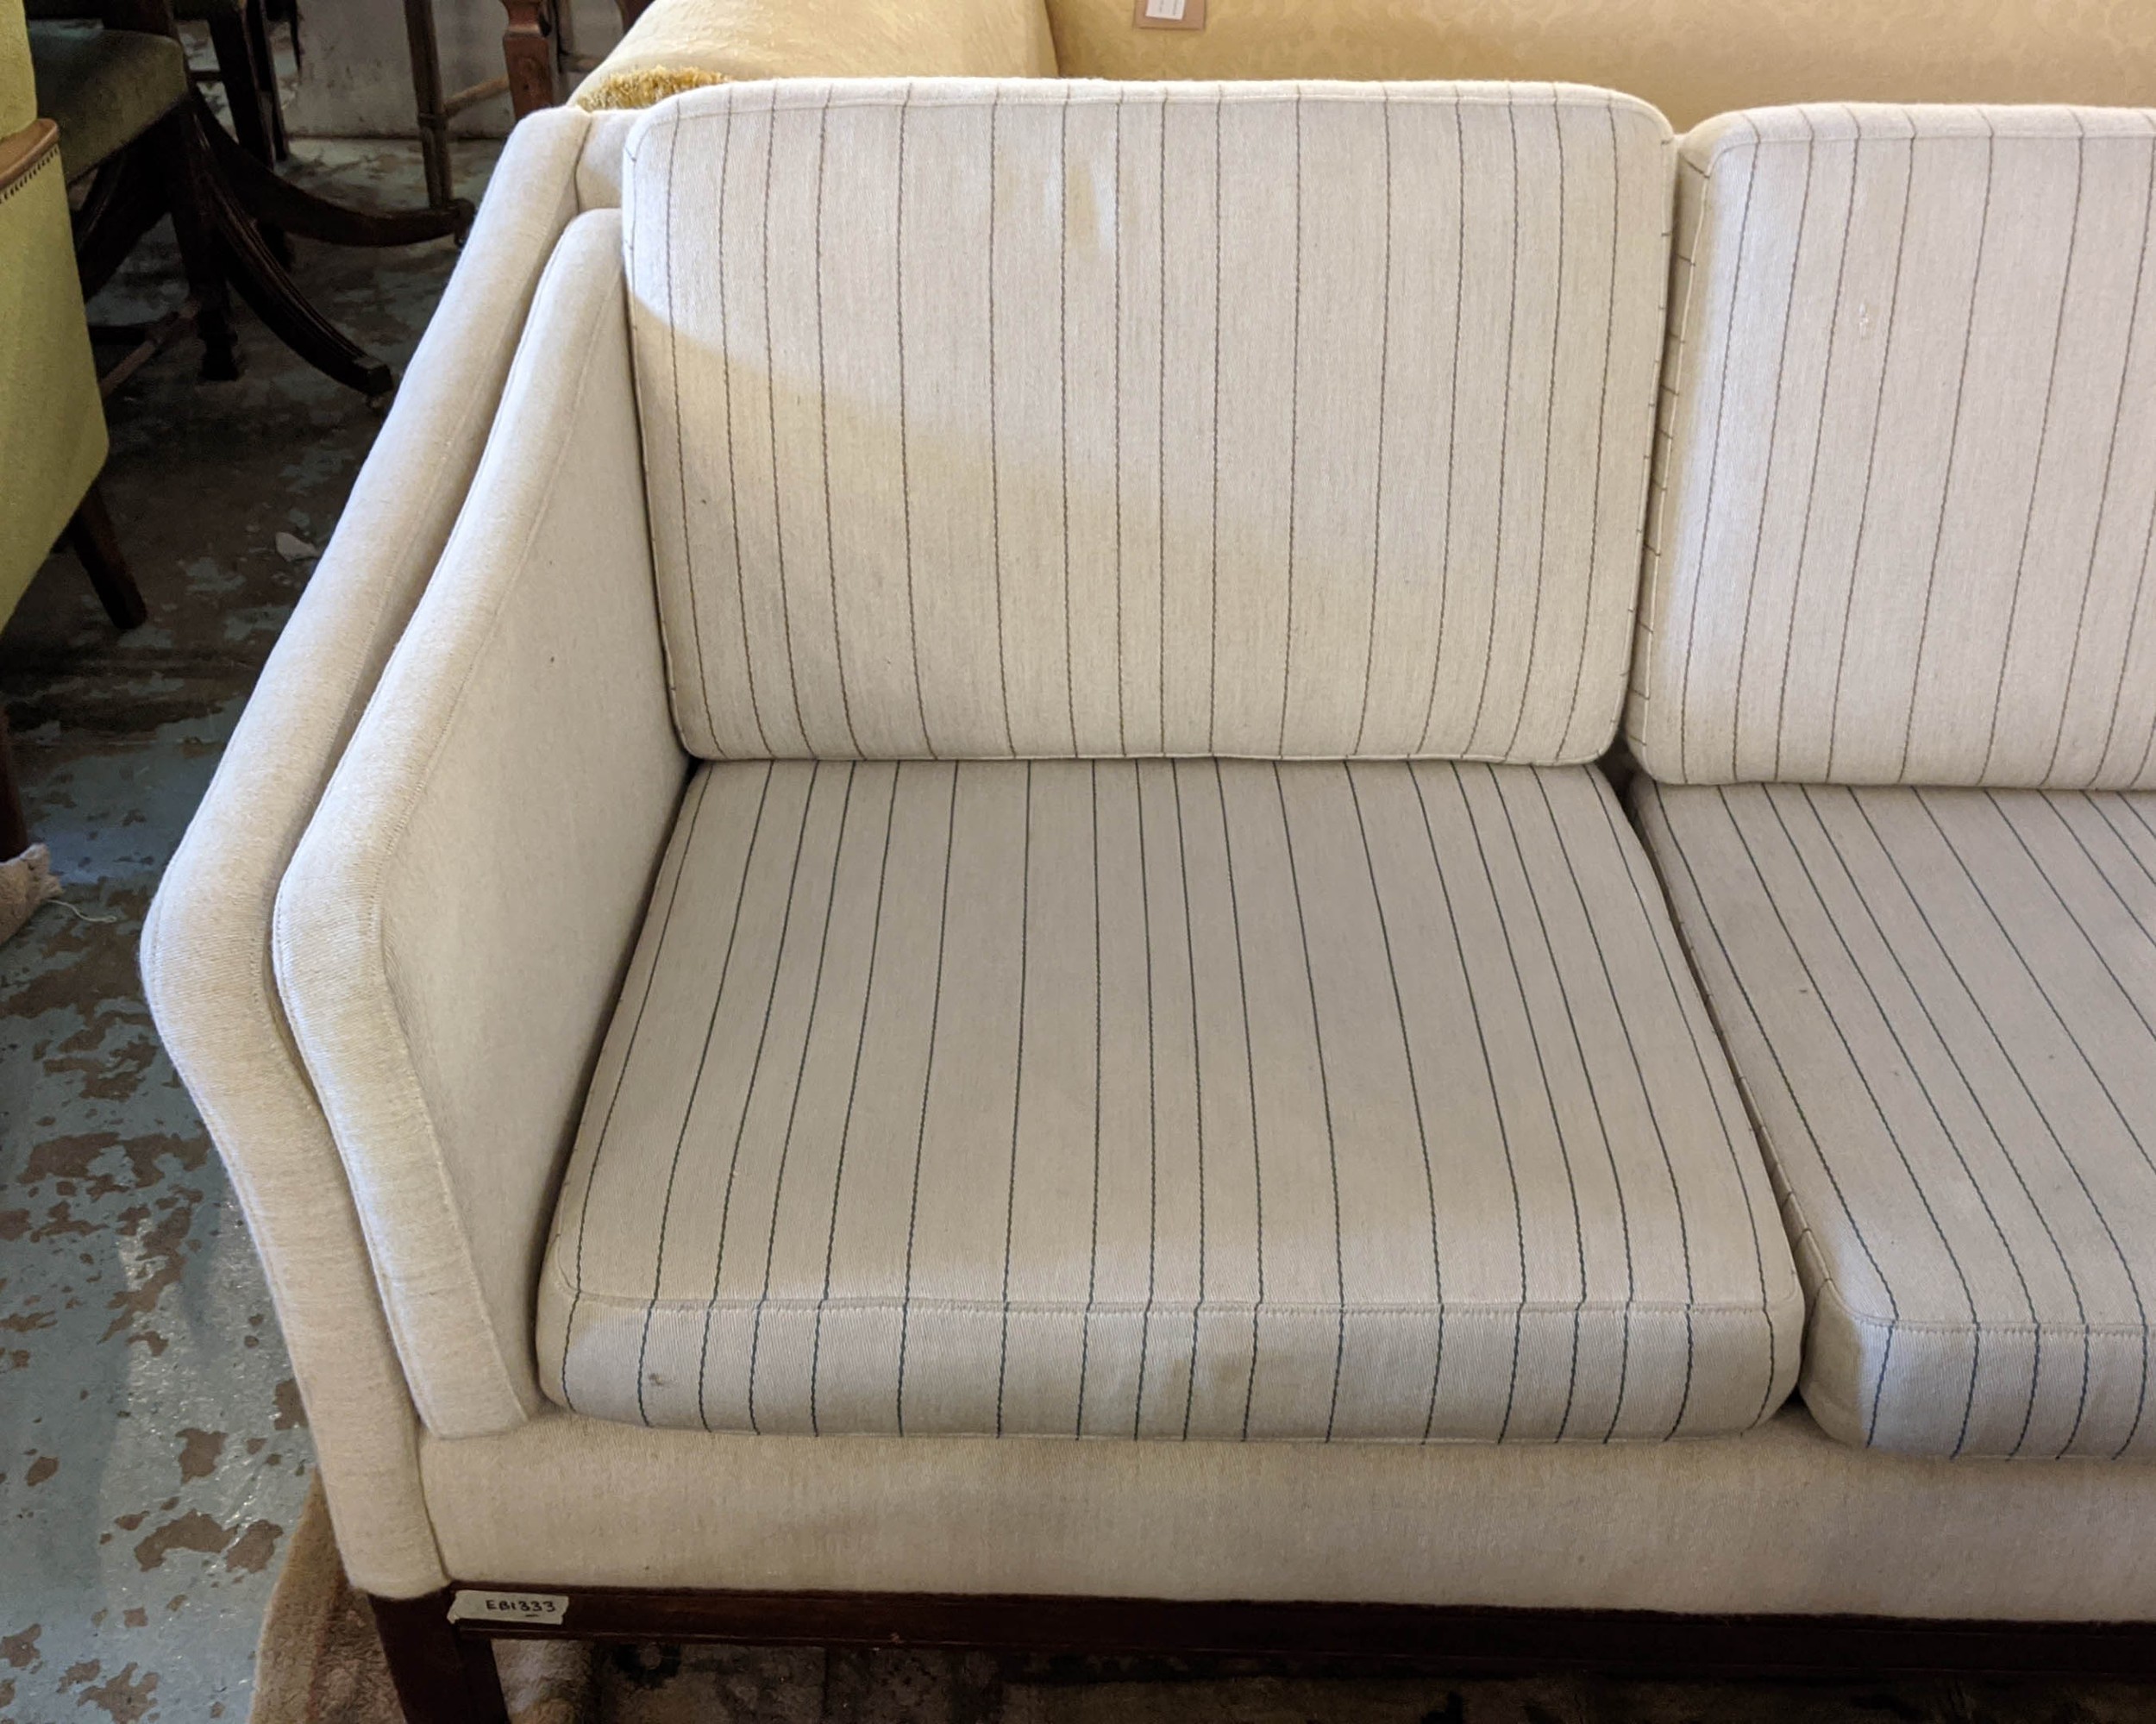 SOFA, 224cm striped upholstery. (fabric needs cleaning) - Image 2 of 4